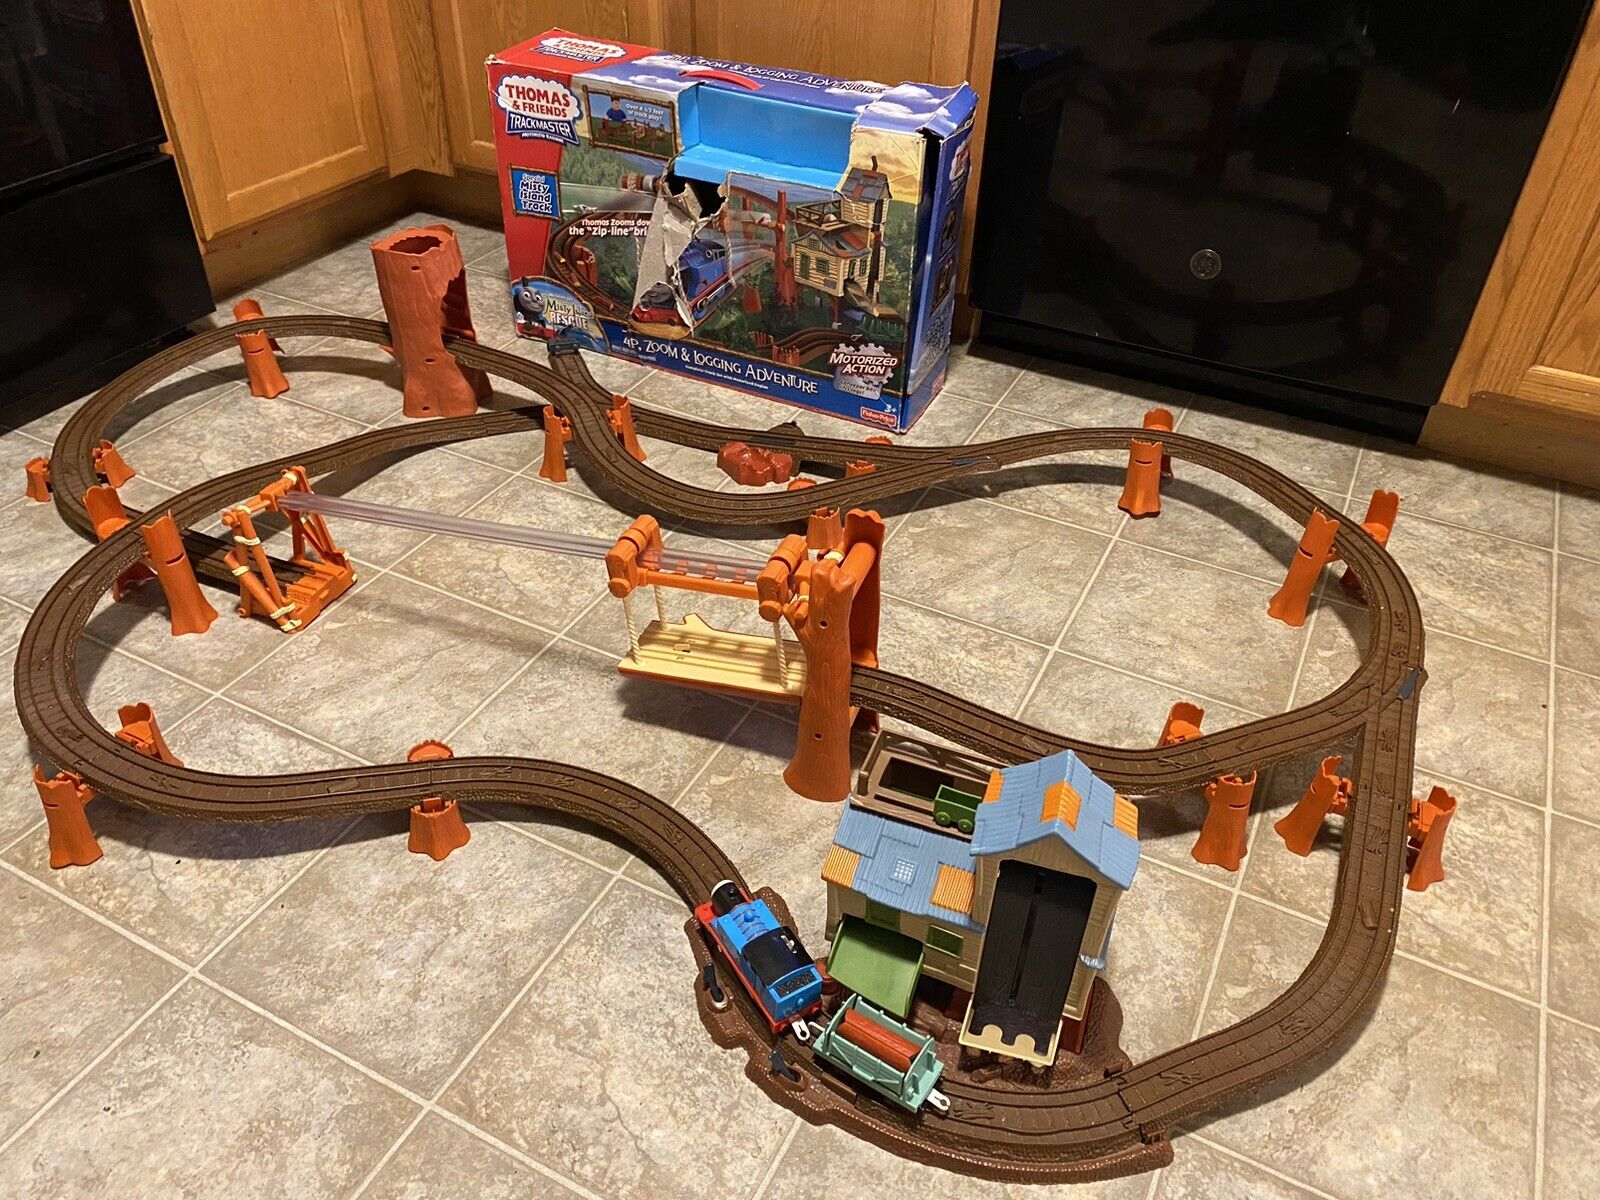 P Thomas the Train Trackmaster Zip Zoom and Logging Adventure Complete